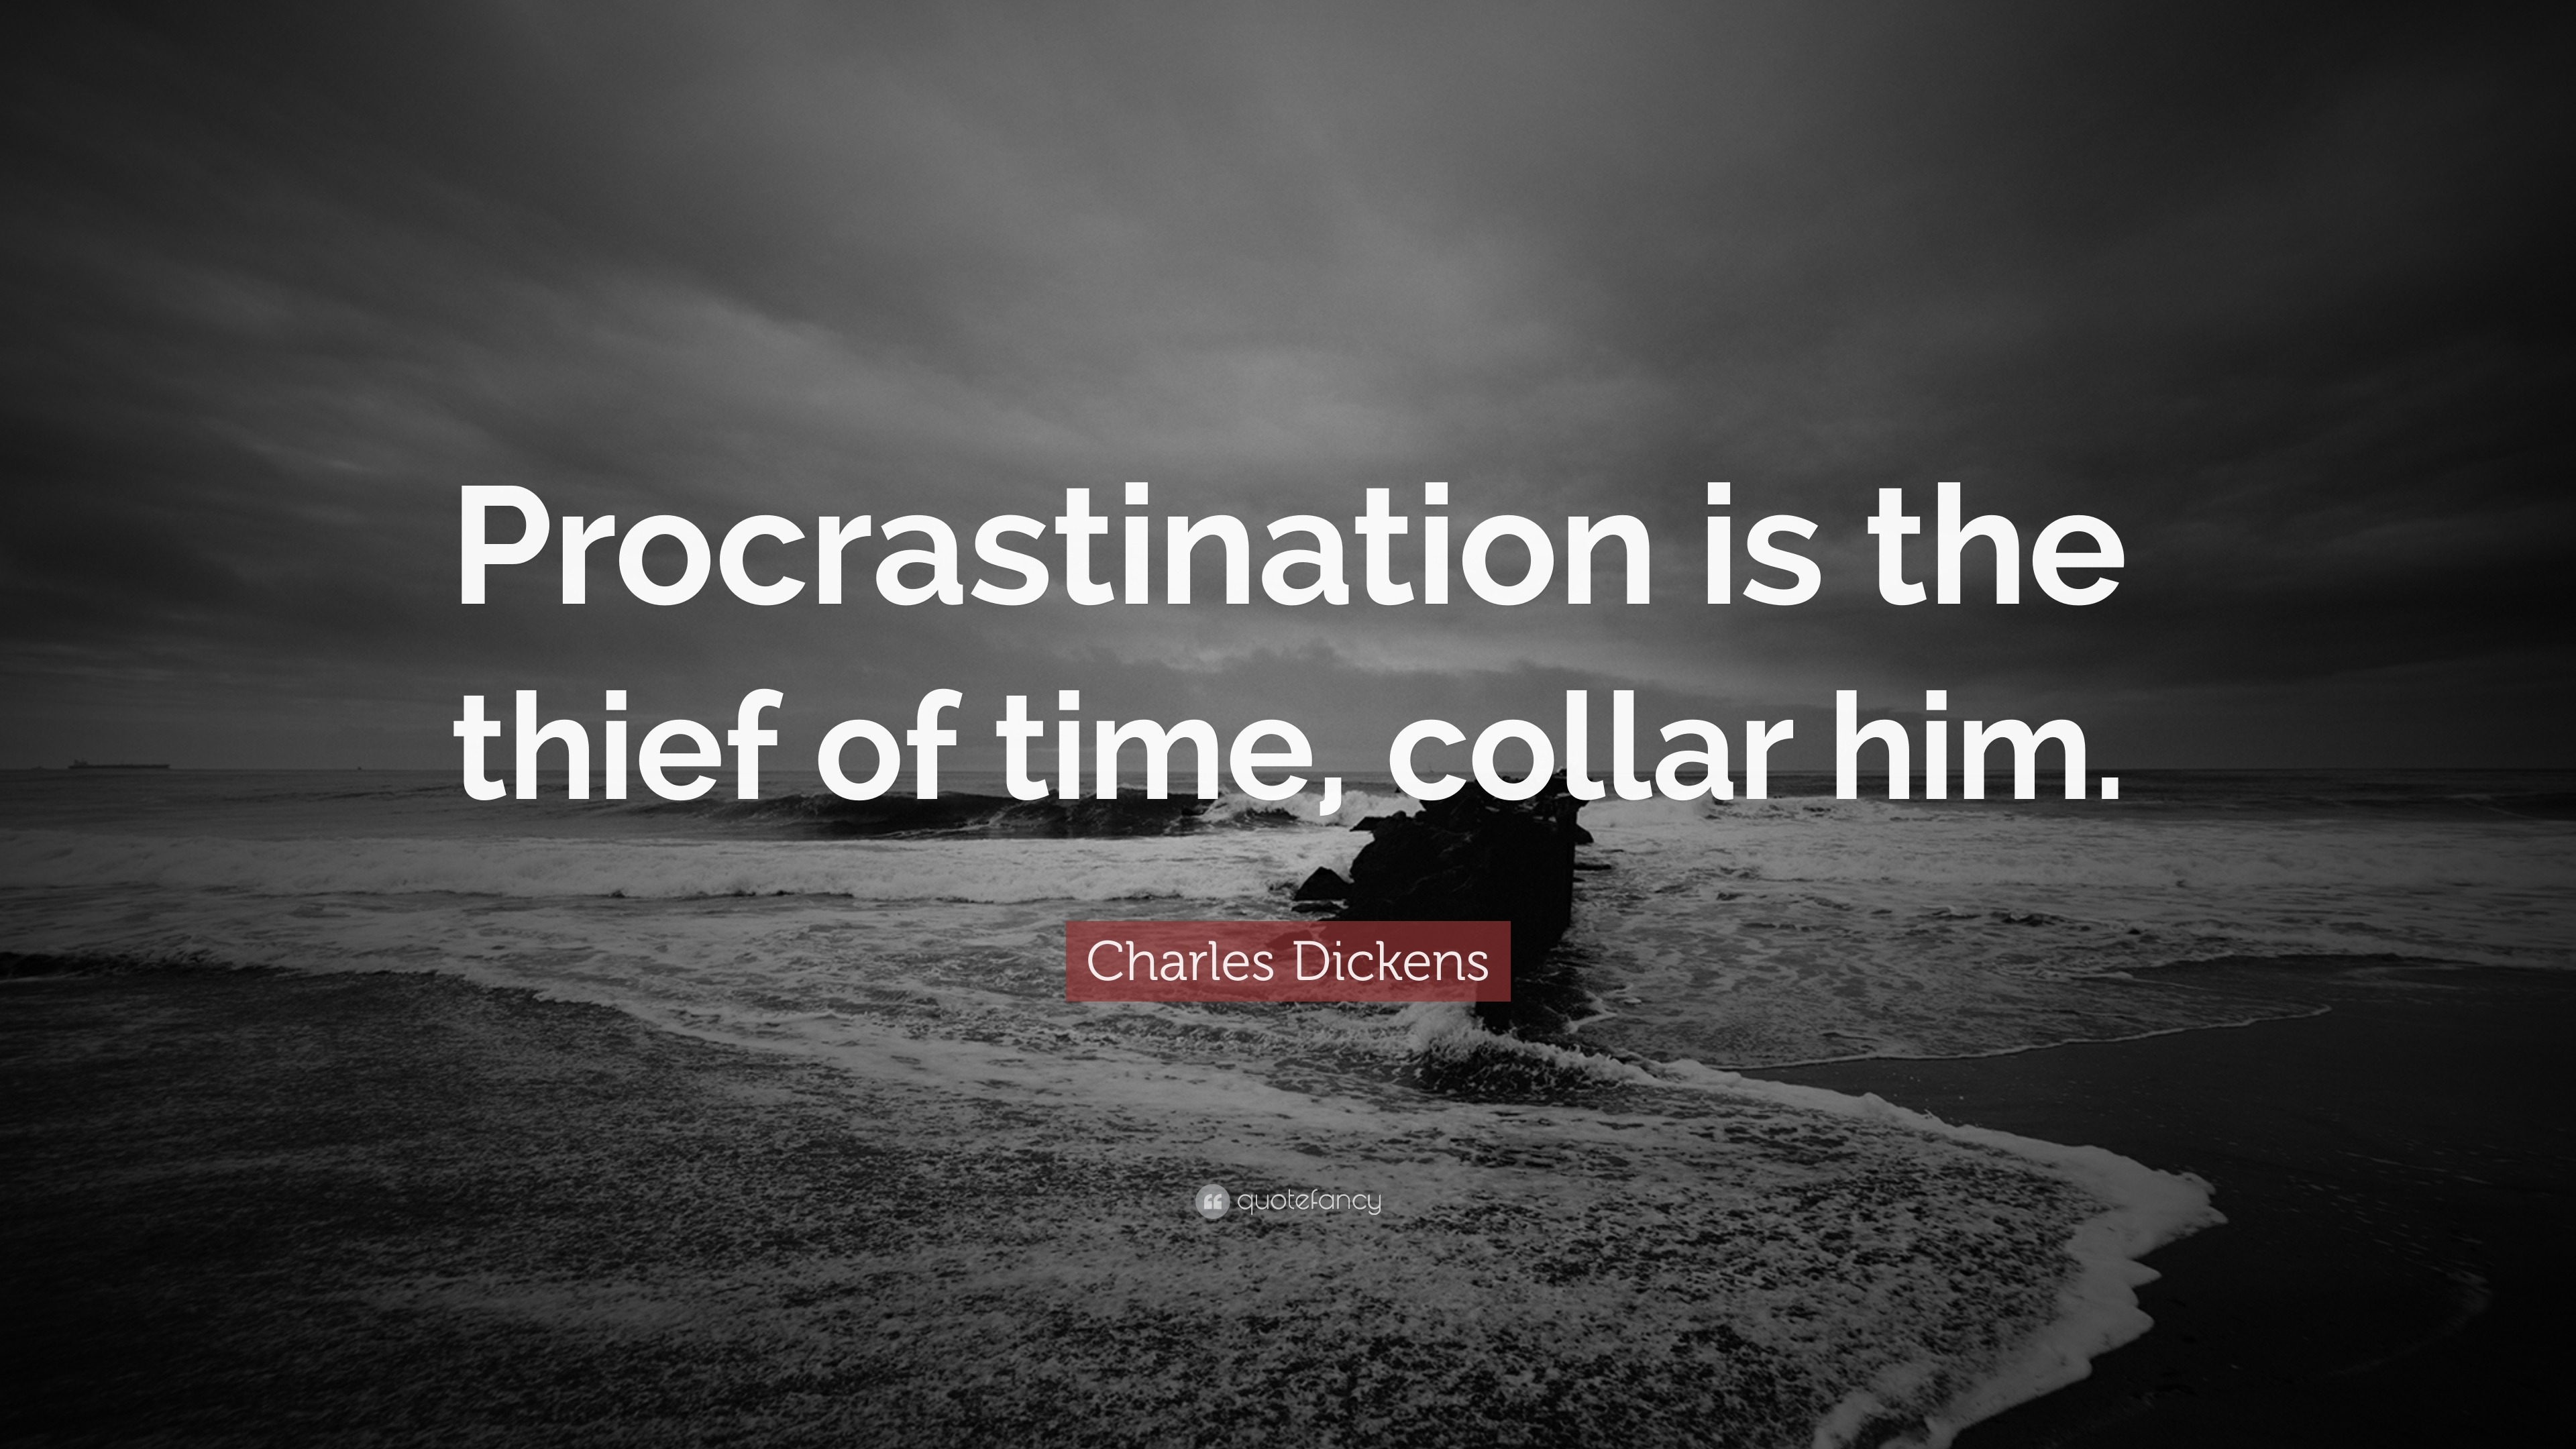 Charles Dickens Quote: “Procrastination is the thief of time, collar